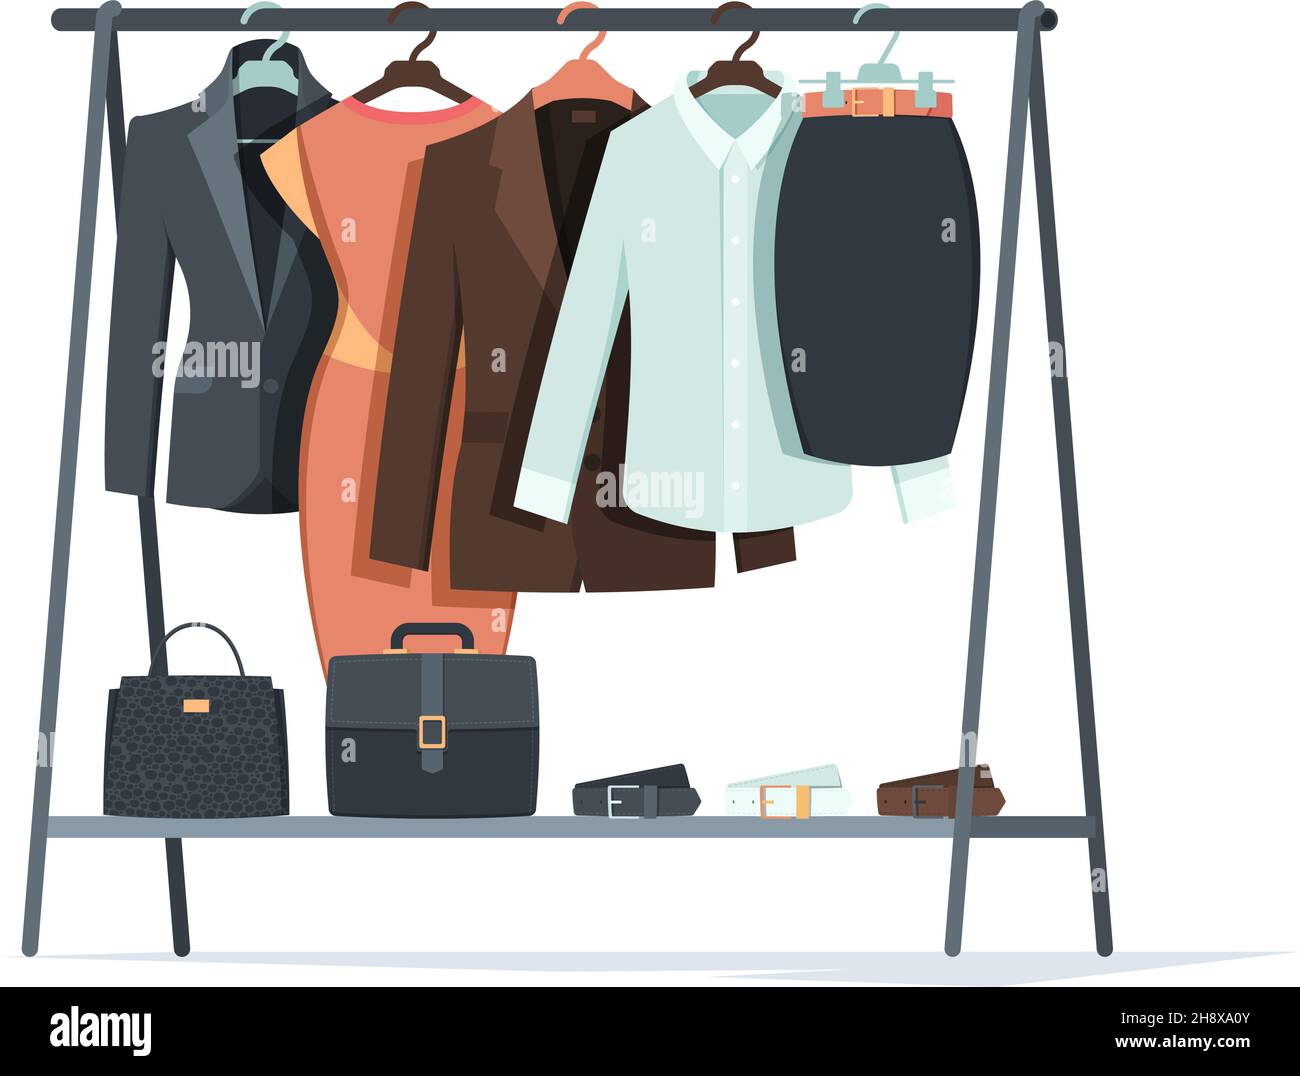 Clothes on hangers. Business textile things for male and female persons dresses shirts pants suits hangs in wardrobe garish vector flat collection Stock Vector